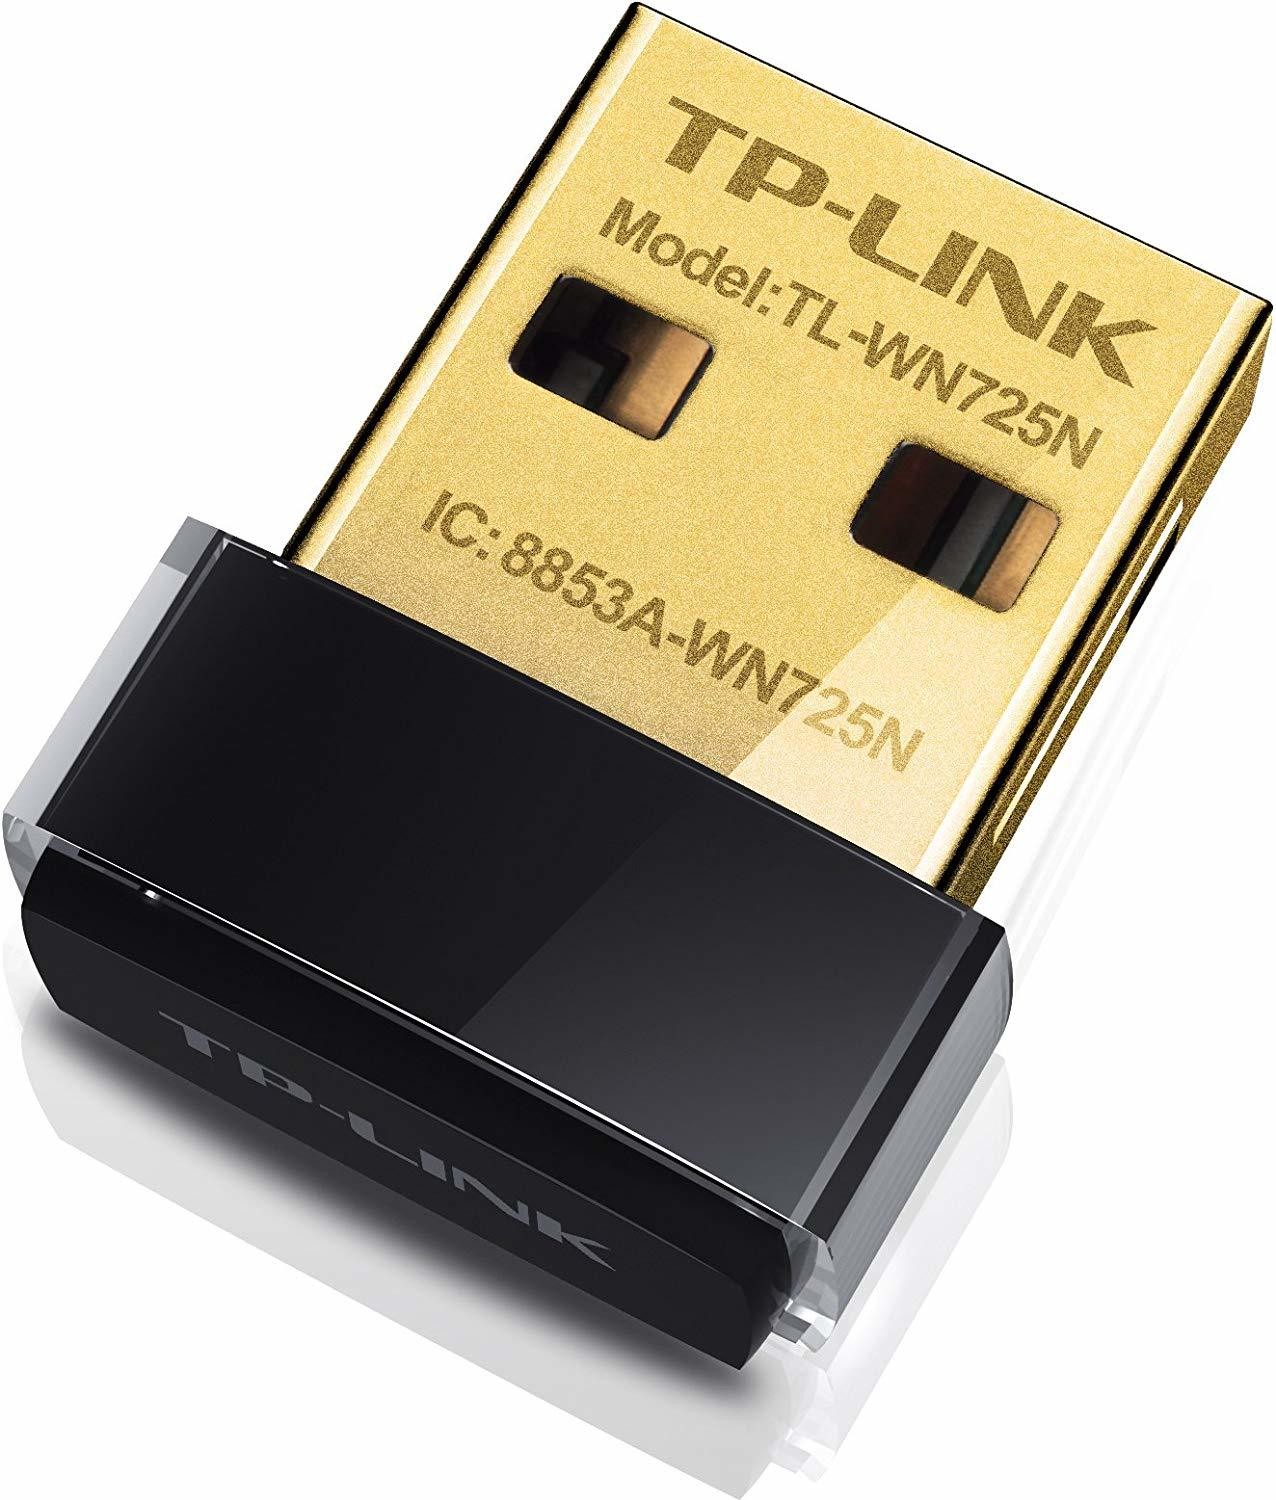 TP-Link TL-WN725N 150Mbps Wireless USB Adapter - Rs.410